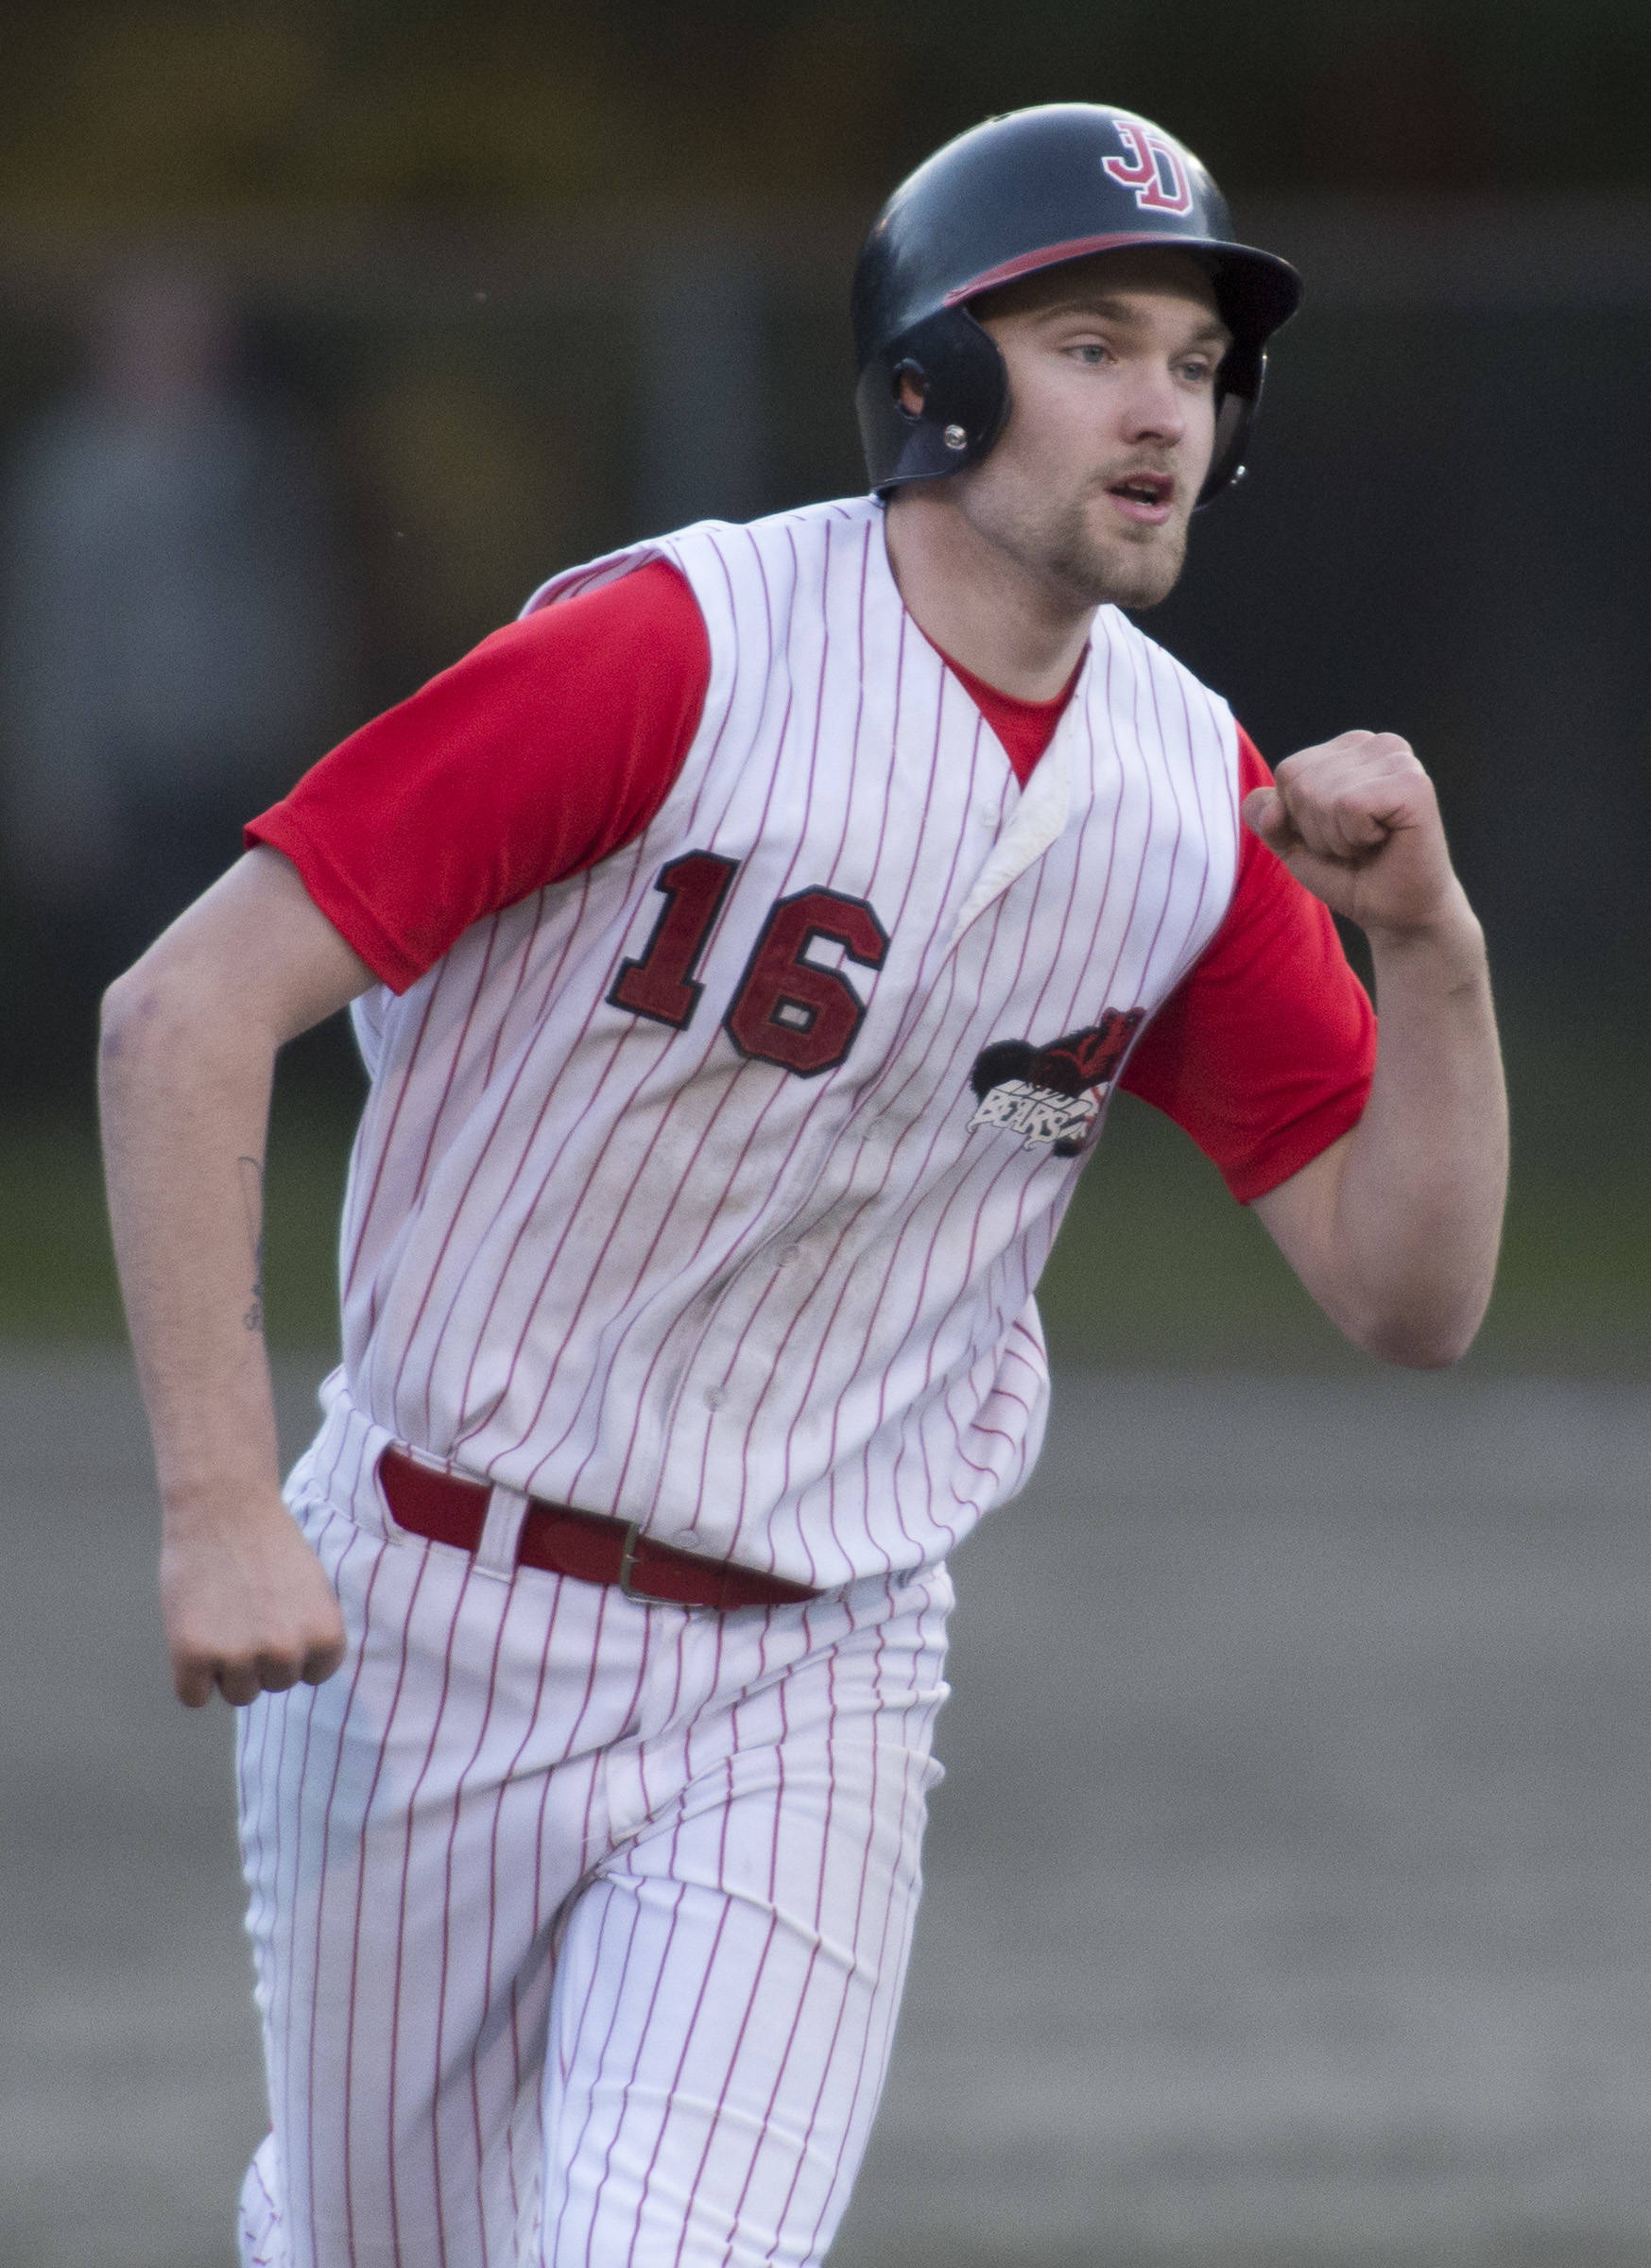 Juneau-Douglas’ Kasey Watts pumps his fist as he rounds the bases after hitting a home run against Thunder Mountain at Adair-Kennedy Memorial Park on Tuesday, May 15, 2018. (Michael Penn | Juneau Empire)